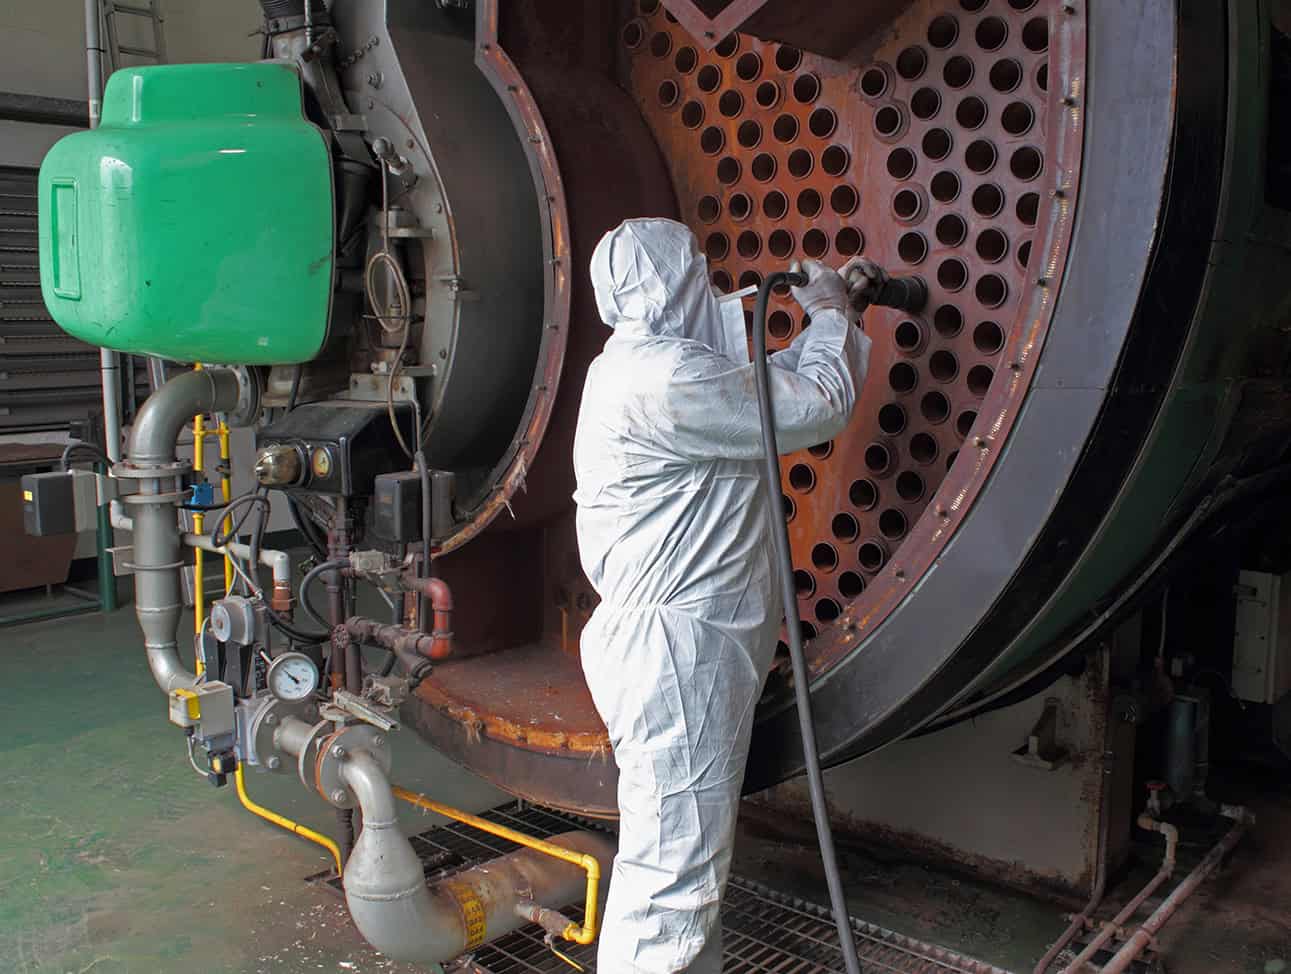 A boiler technician wearing protective gear cleaning a large boiler